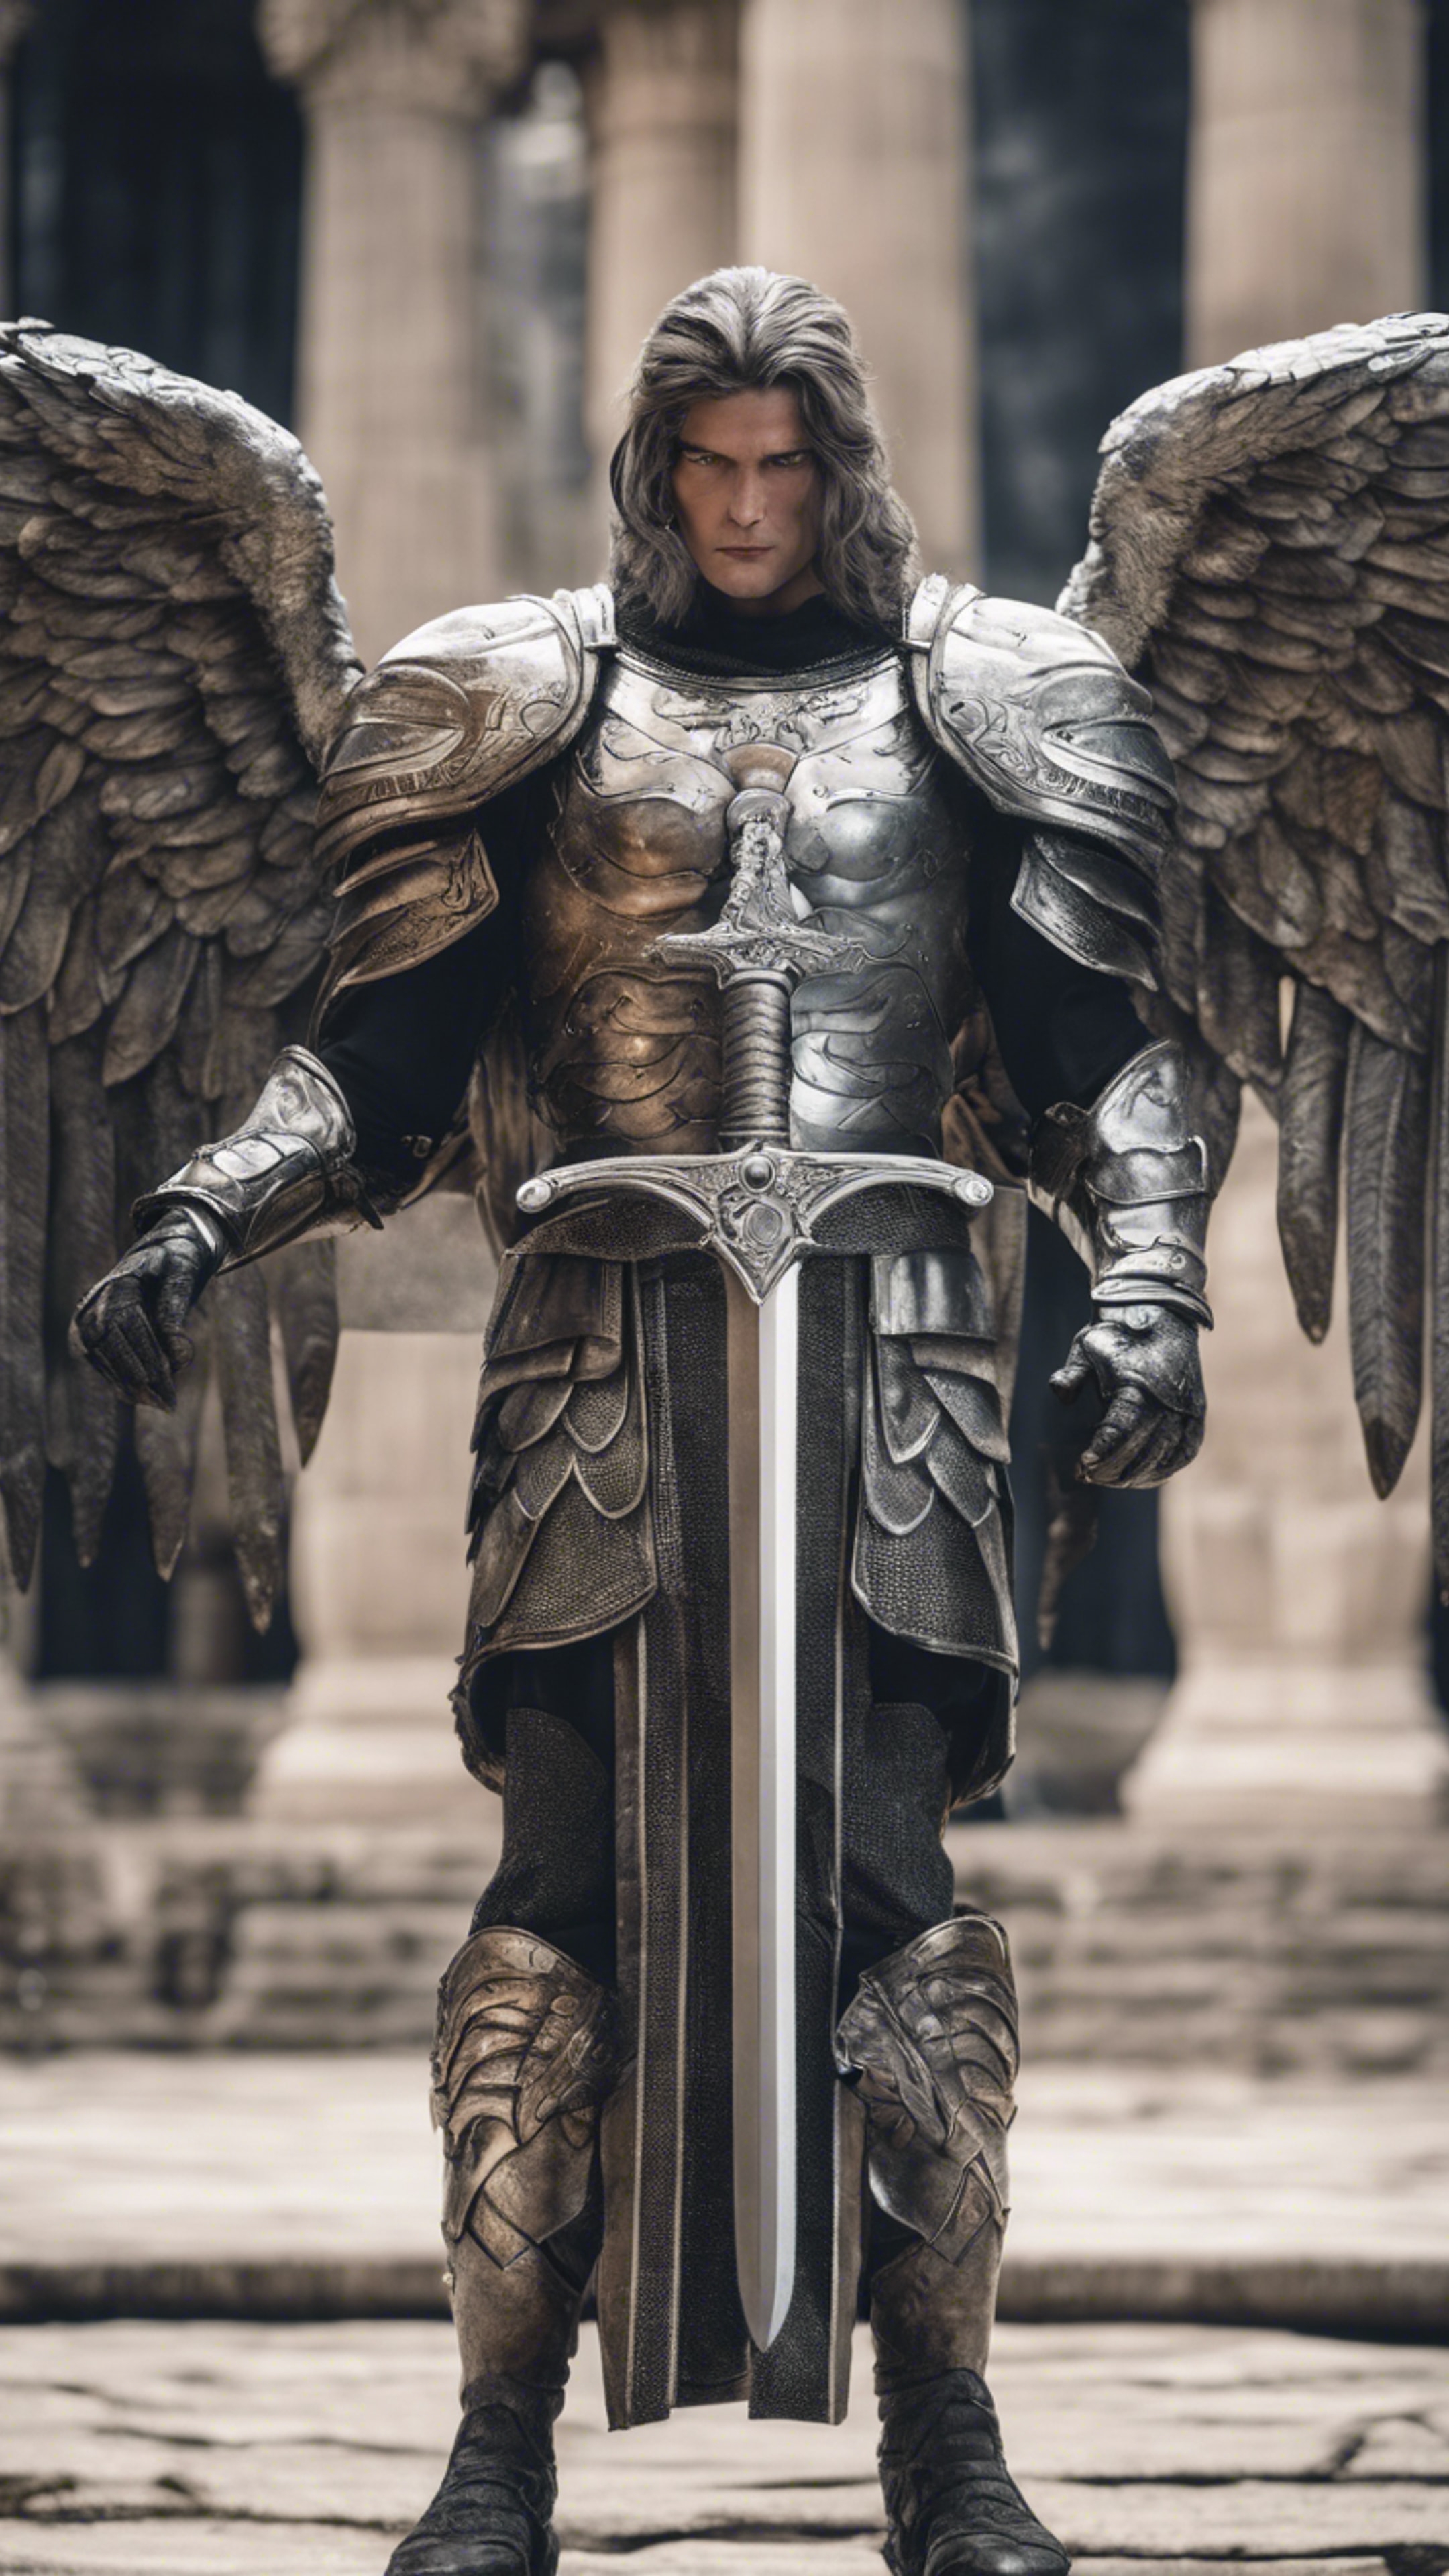 A strong archangel with a great silver sword in battle stance. Тапет[1419cc1cb5fd40c69a58]